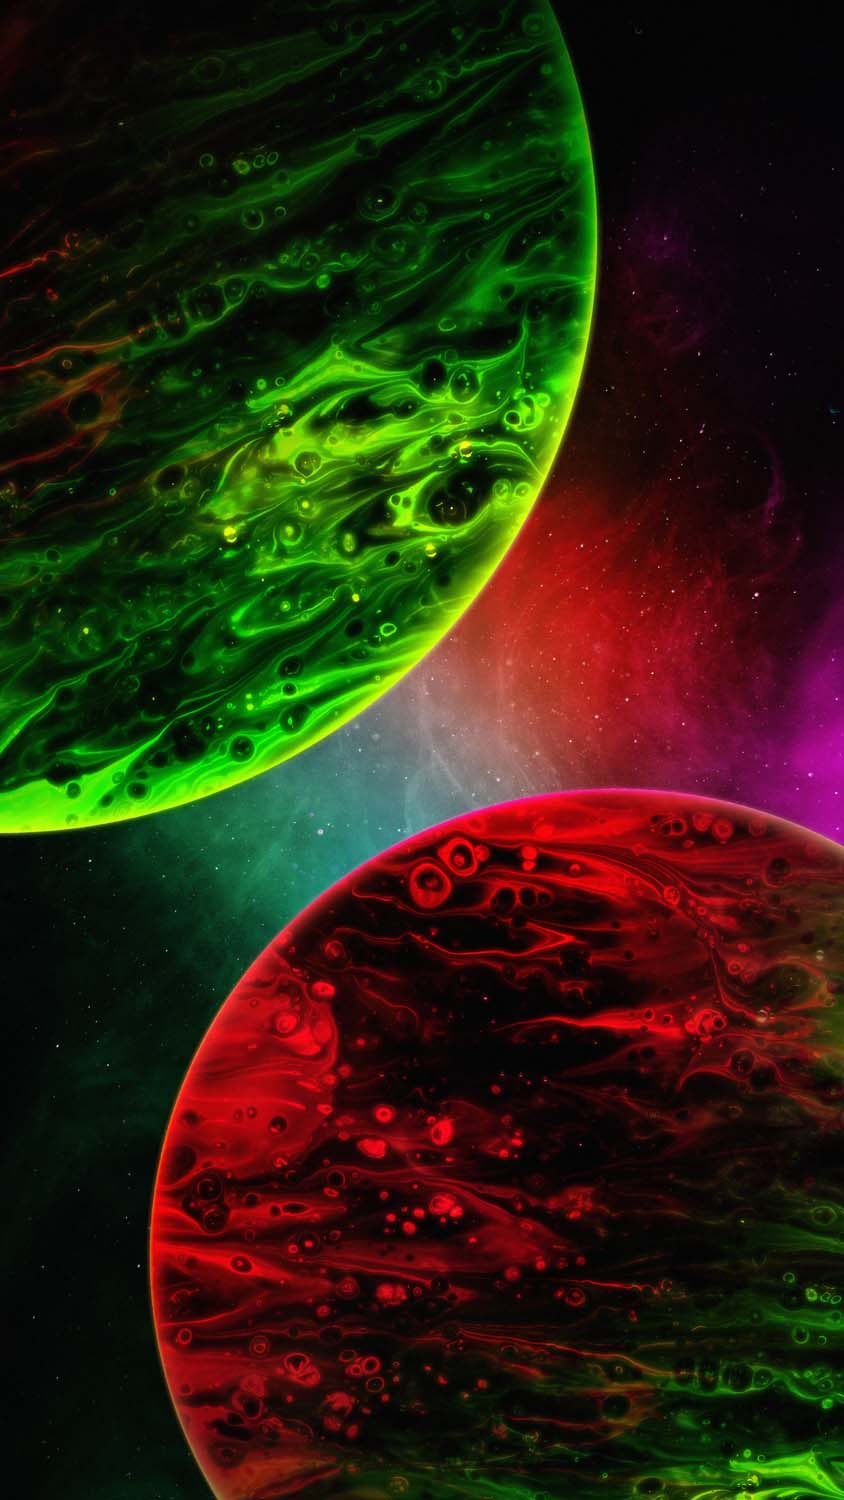 Strange Amoled Planets IPhone Wallpaper HD  IPhone Wallpapers